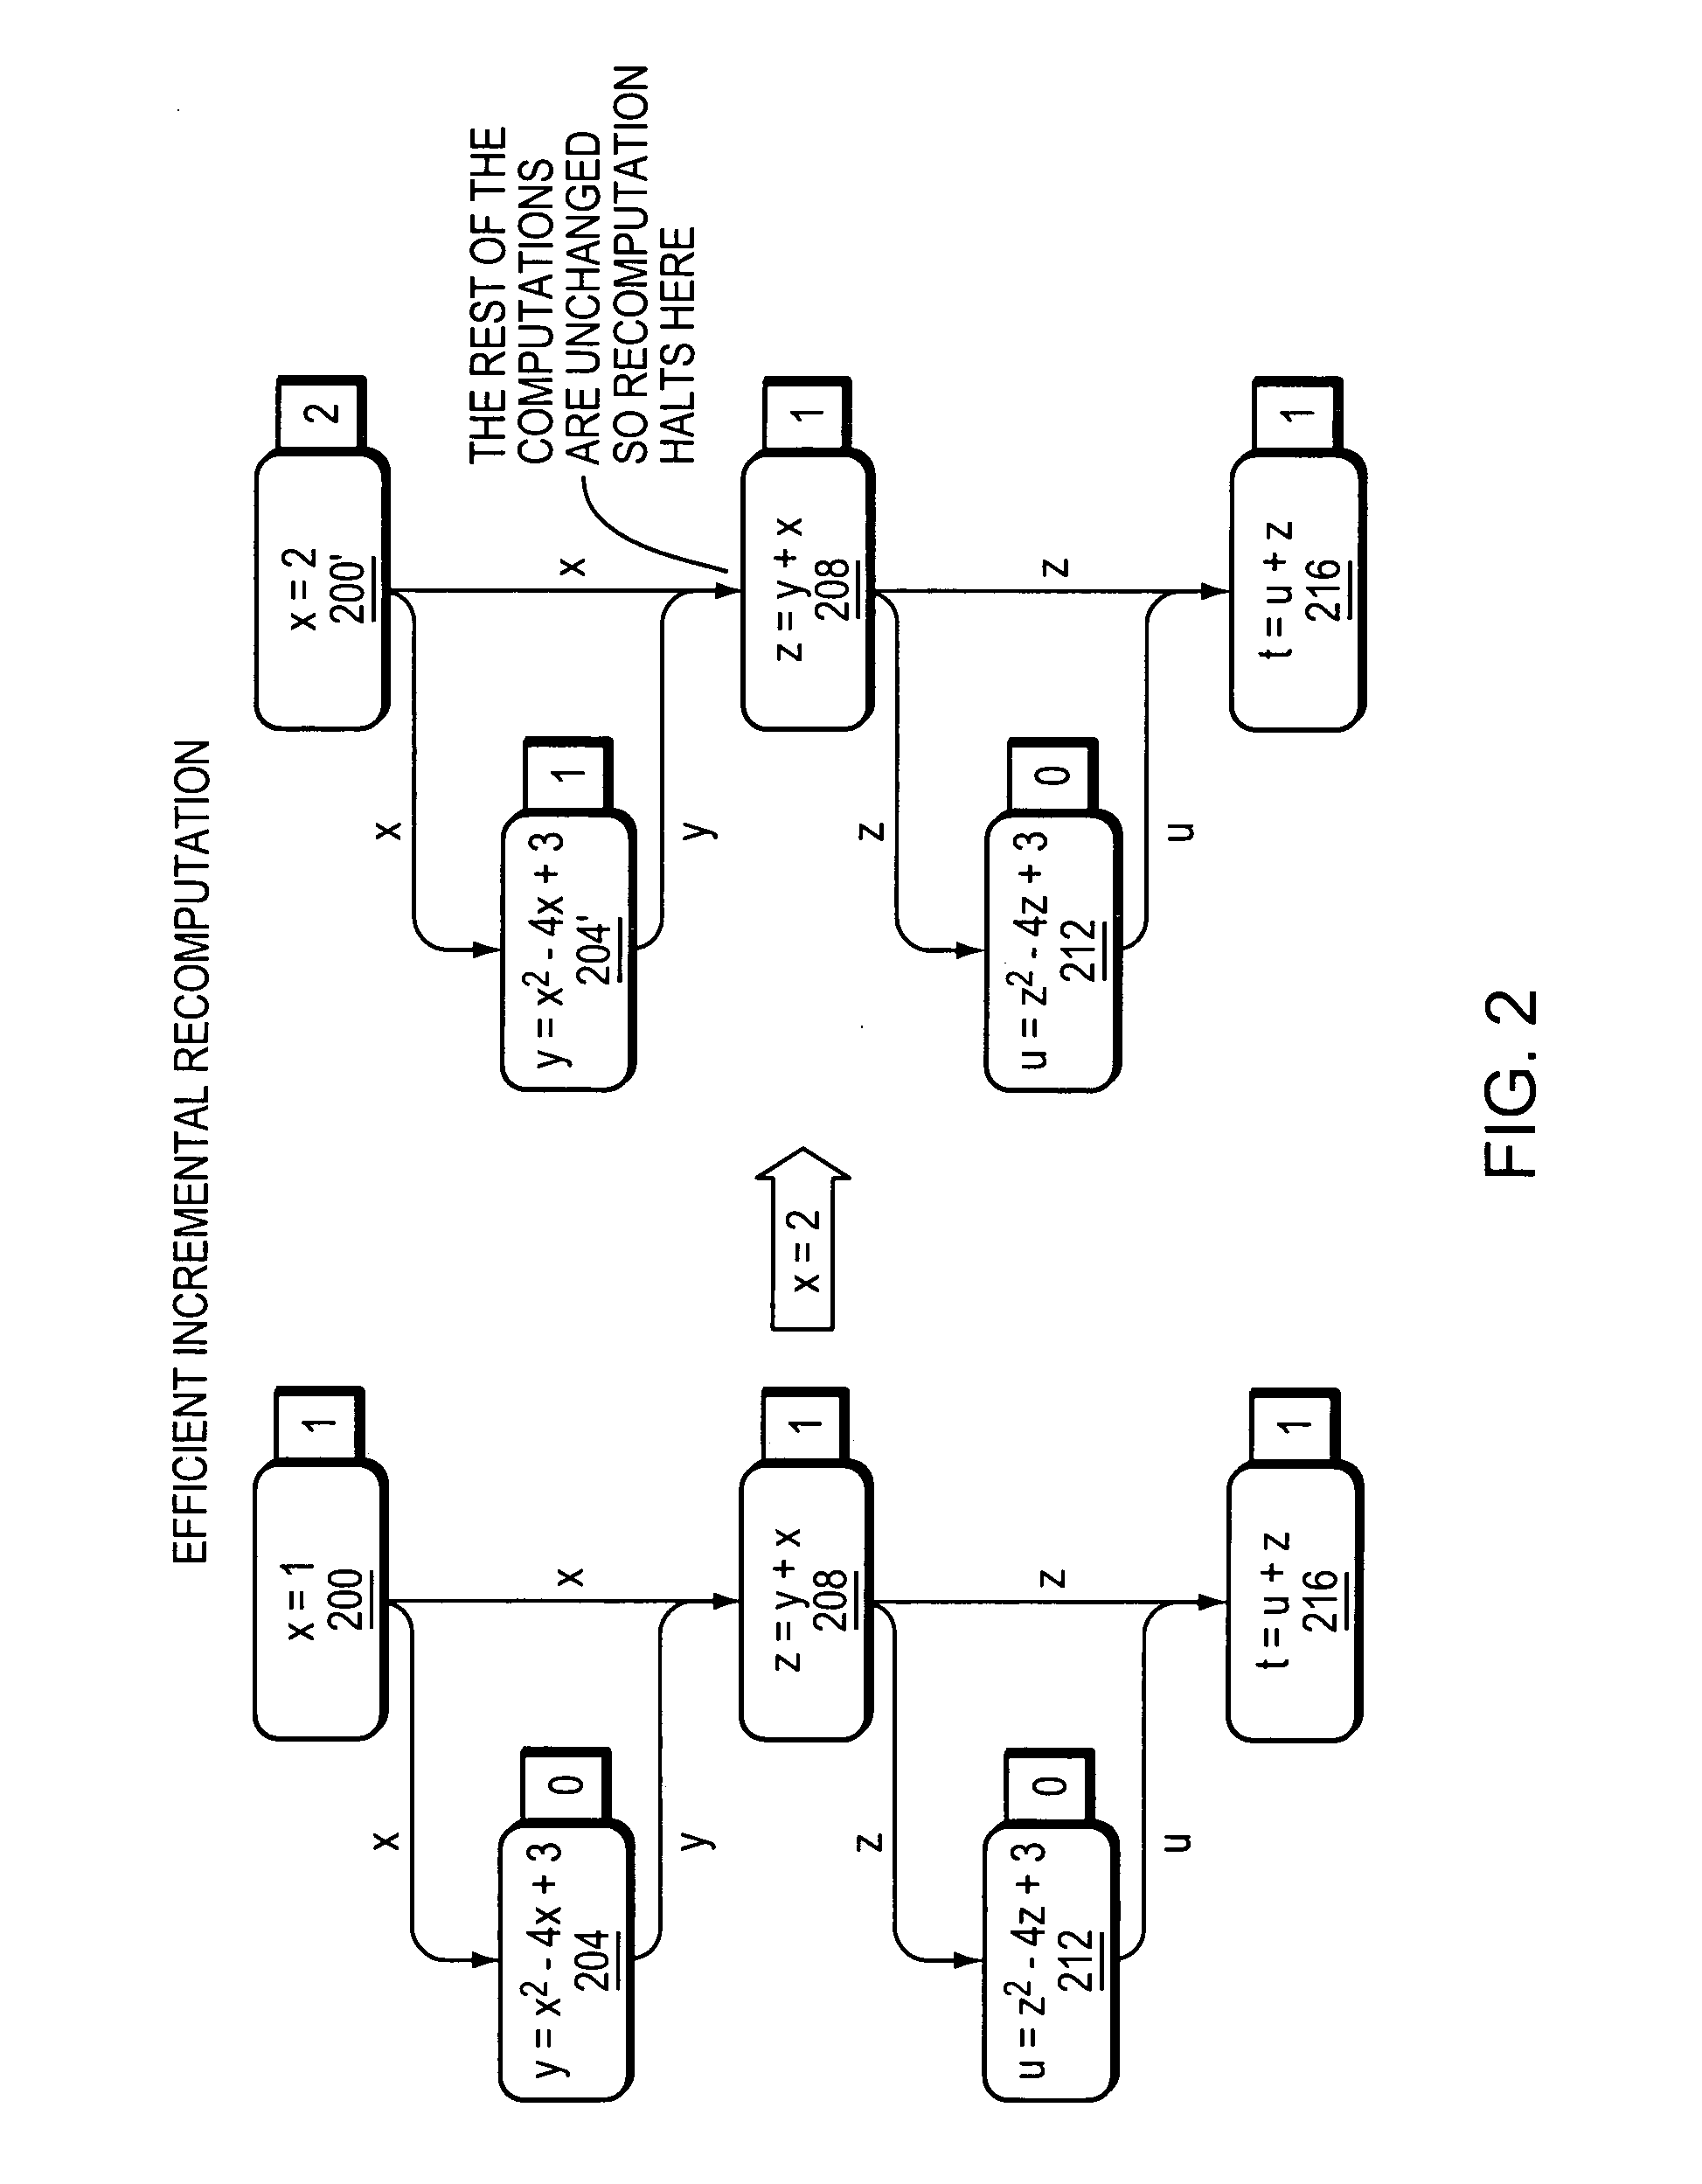 Systems and methods for processing changing data